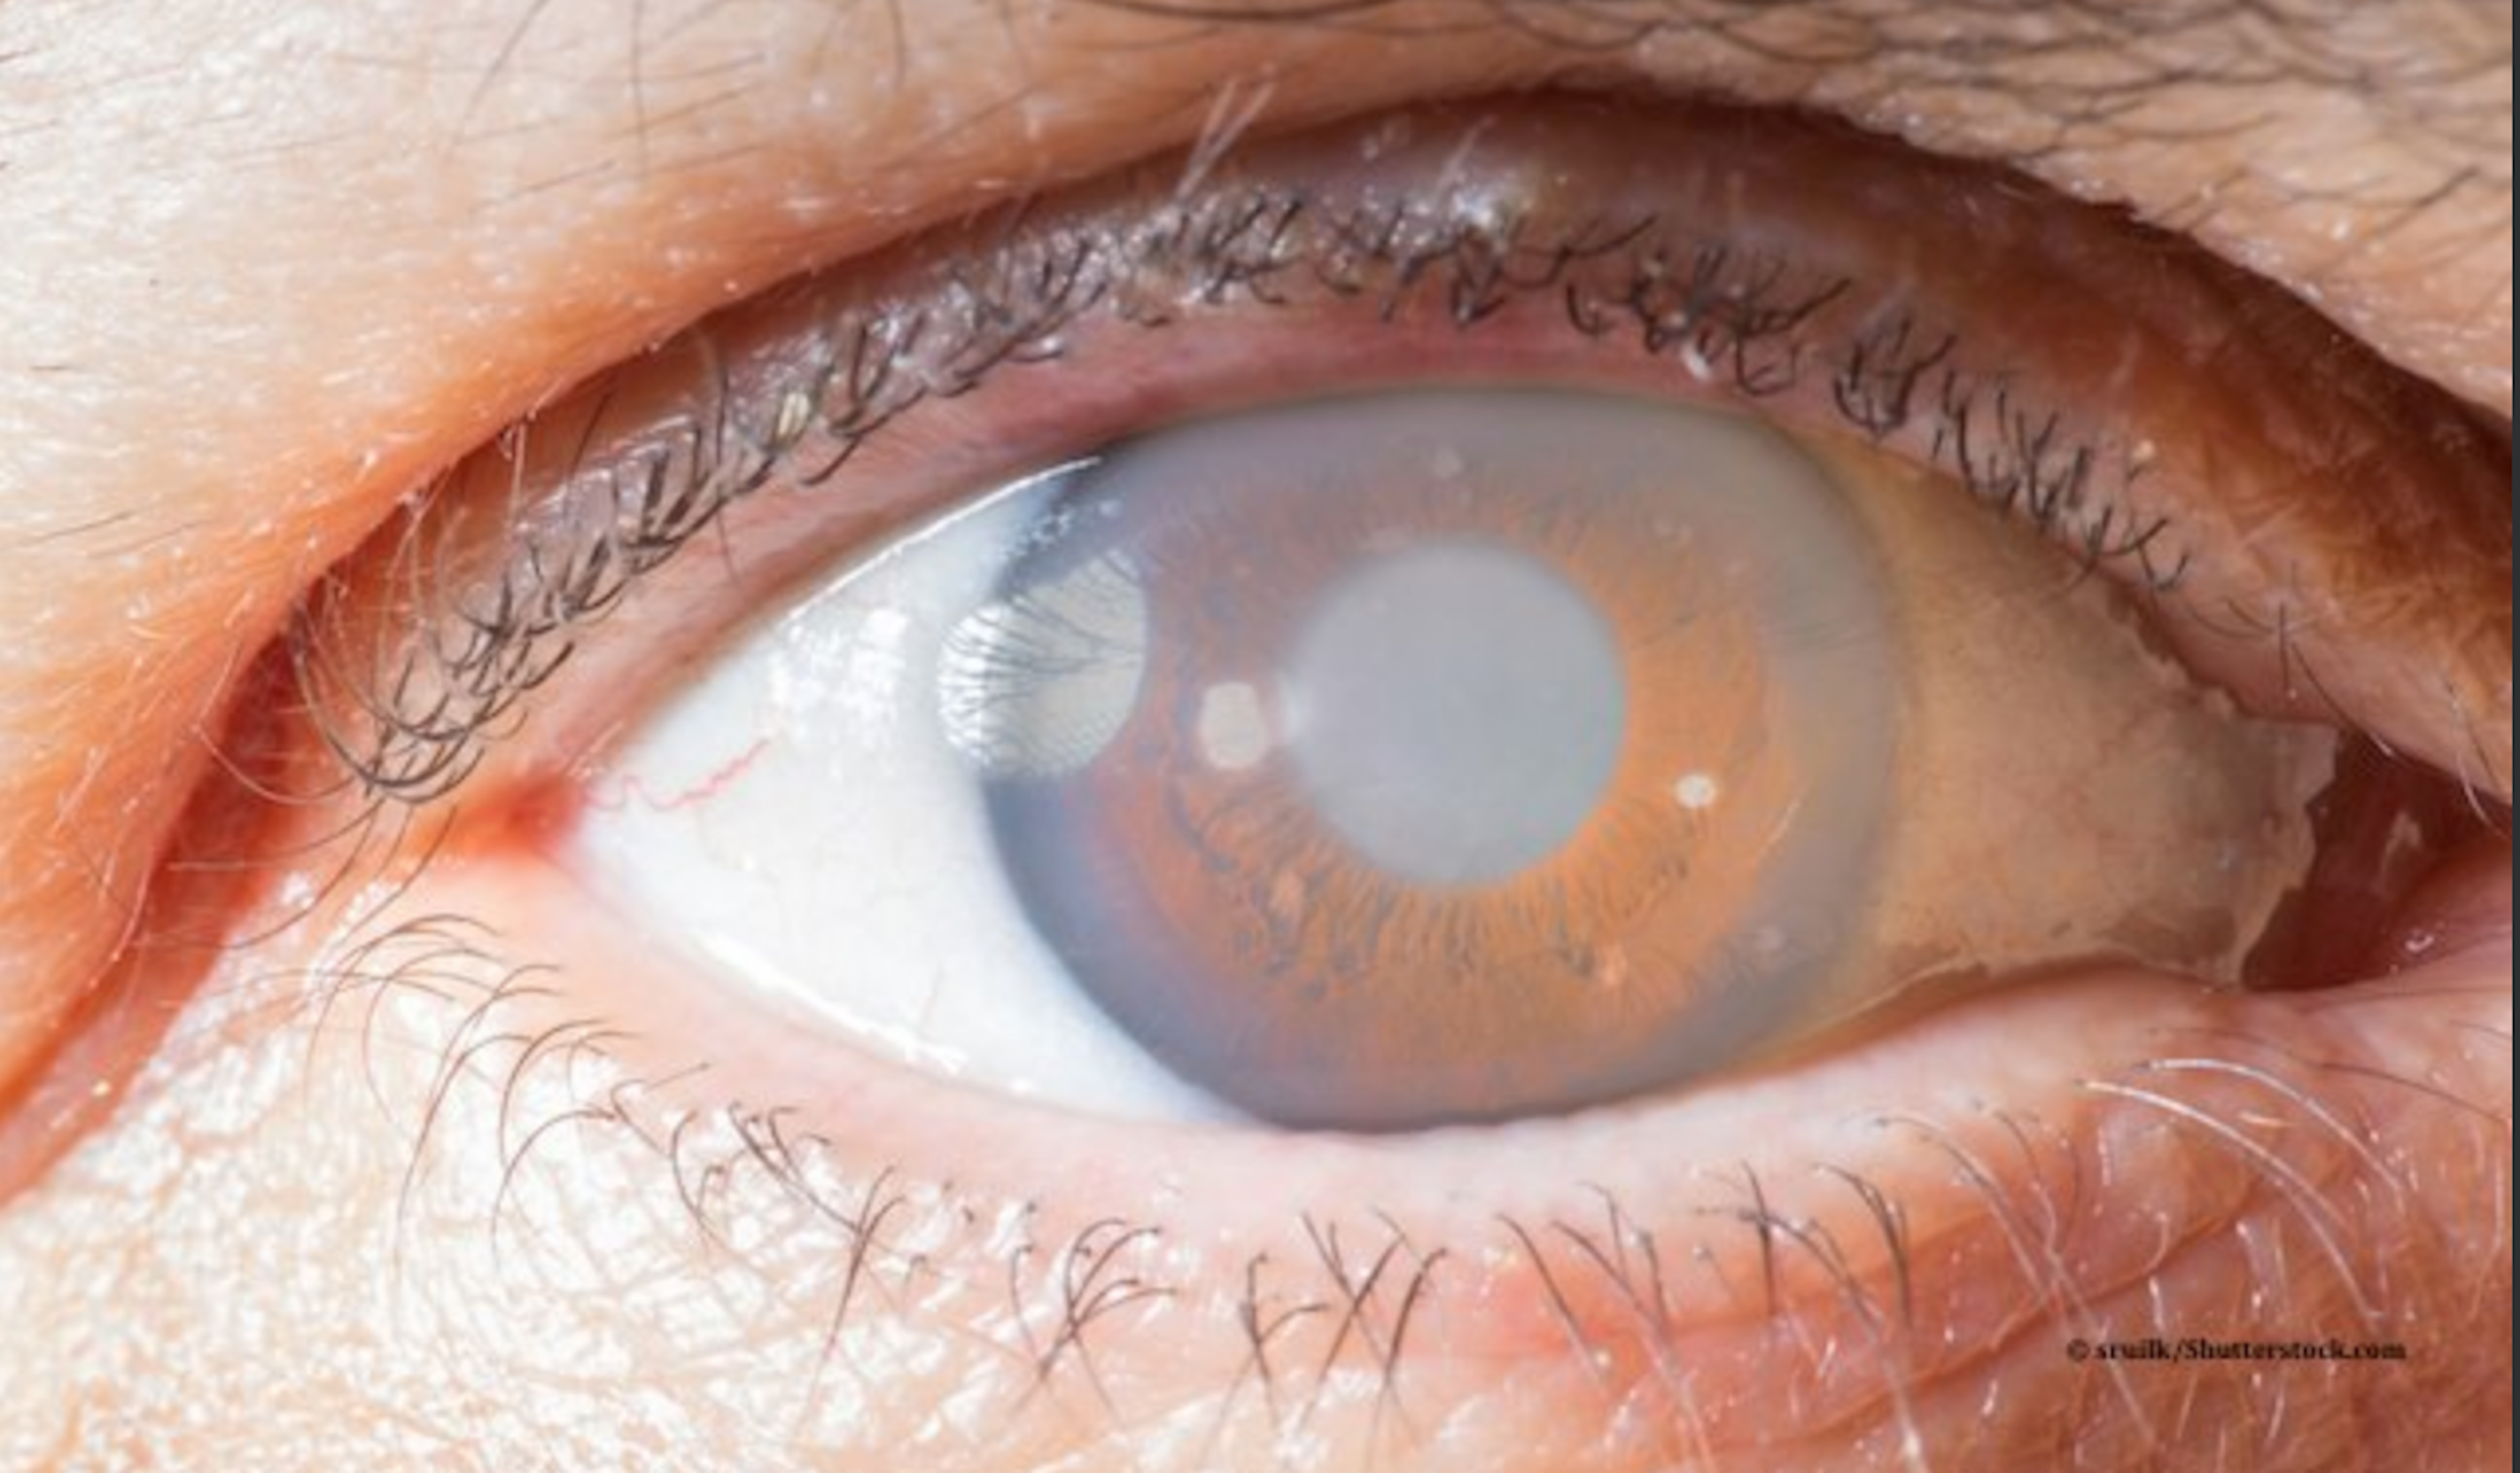 Surgery developed by ophthalmologist at Dean McGee Eye Institute proves its effectiveness